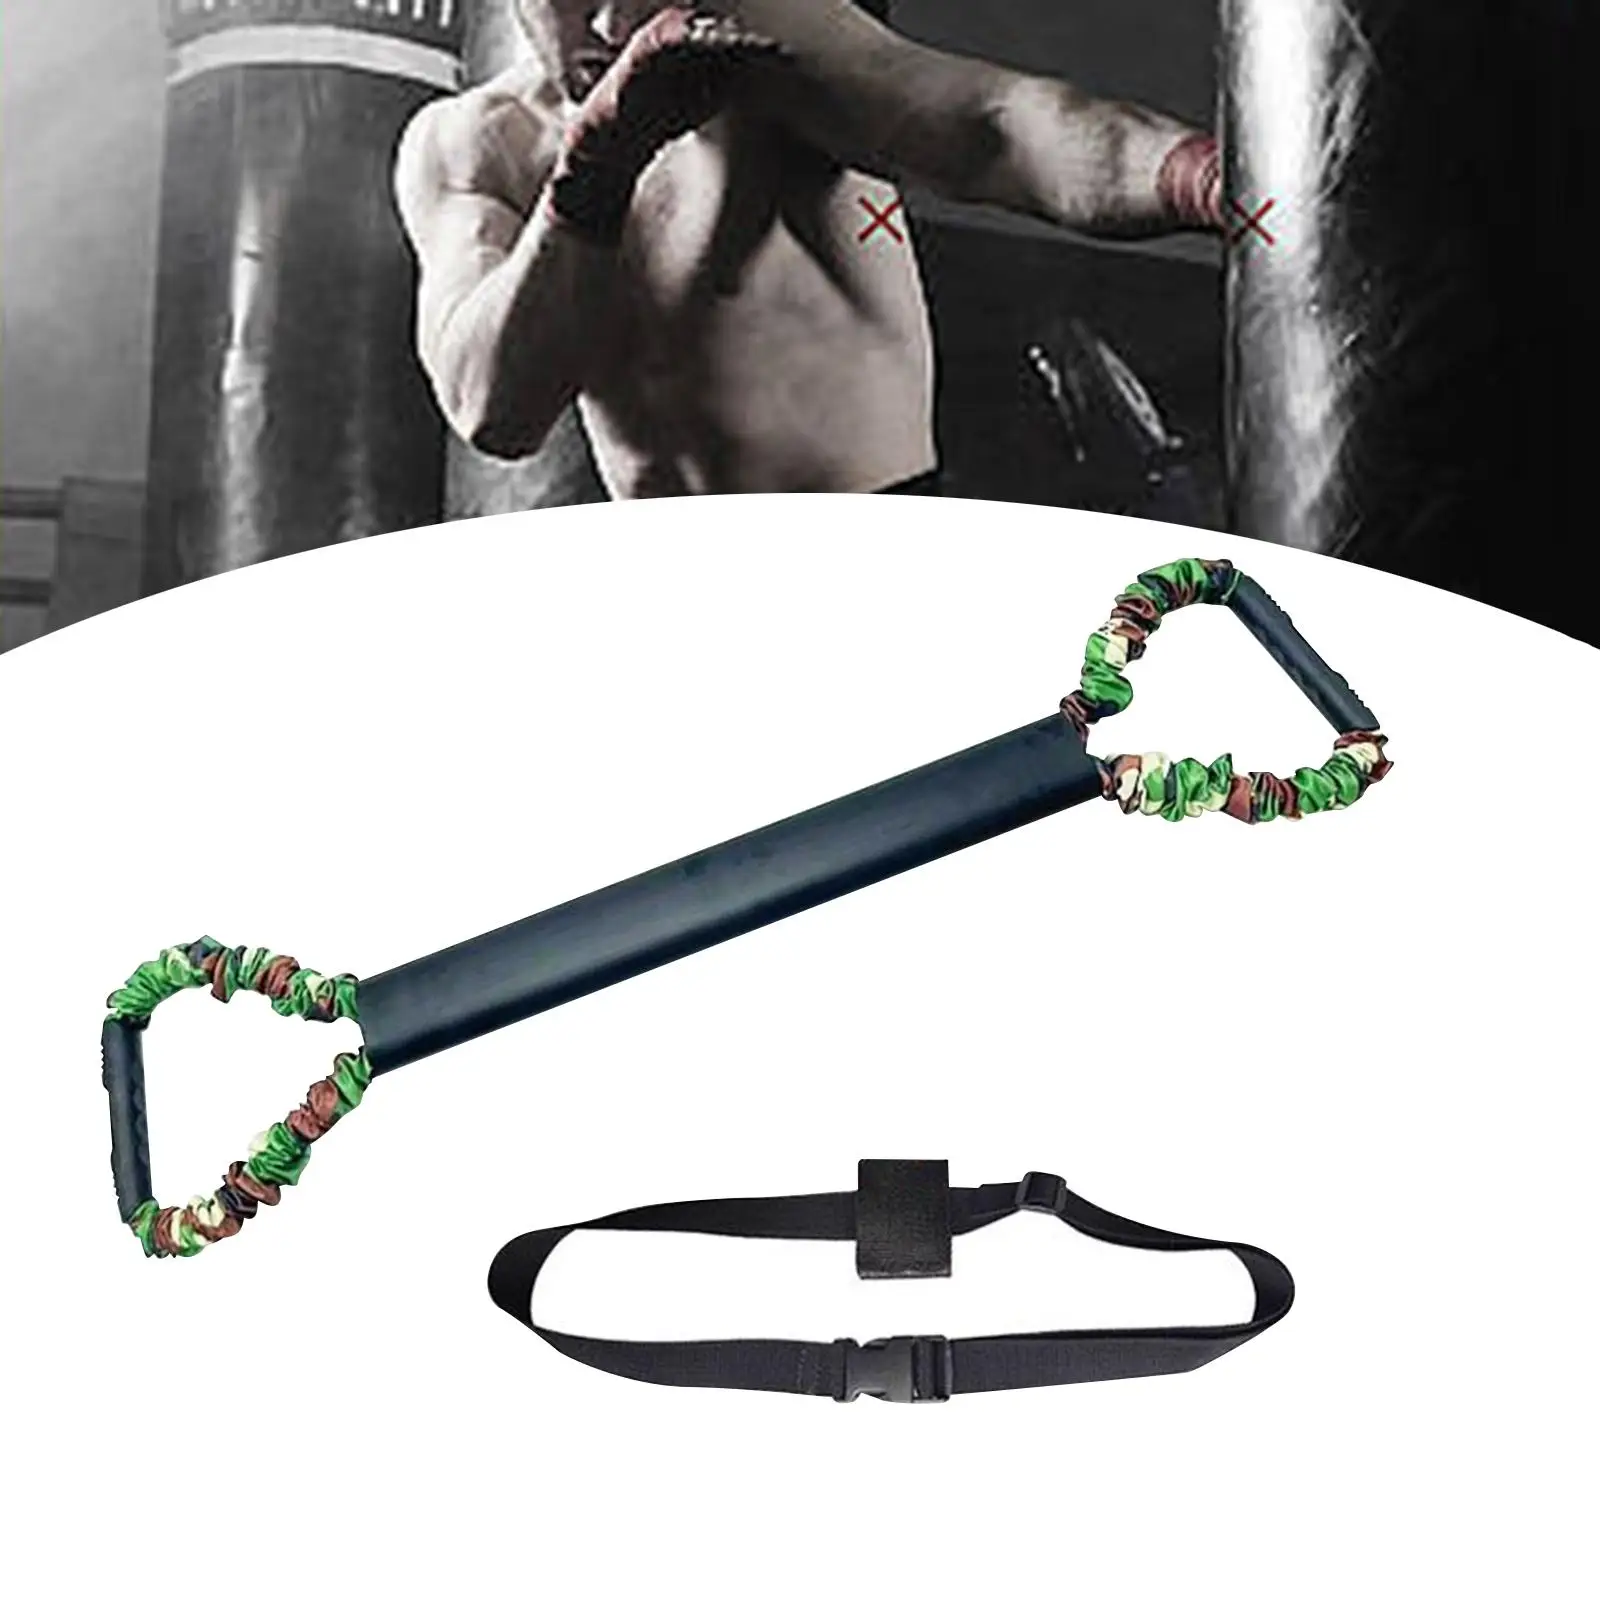 Boxing Resistance Band for Legs Arm Football Workout Equipment Exercise Band